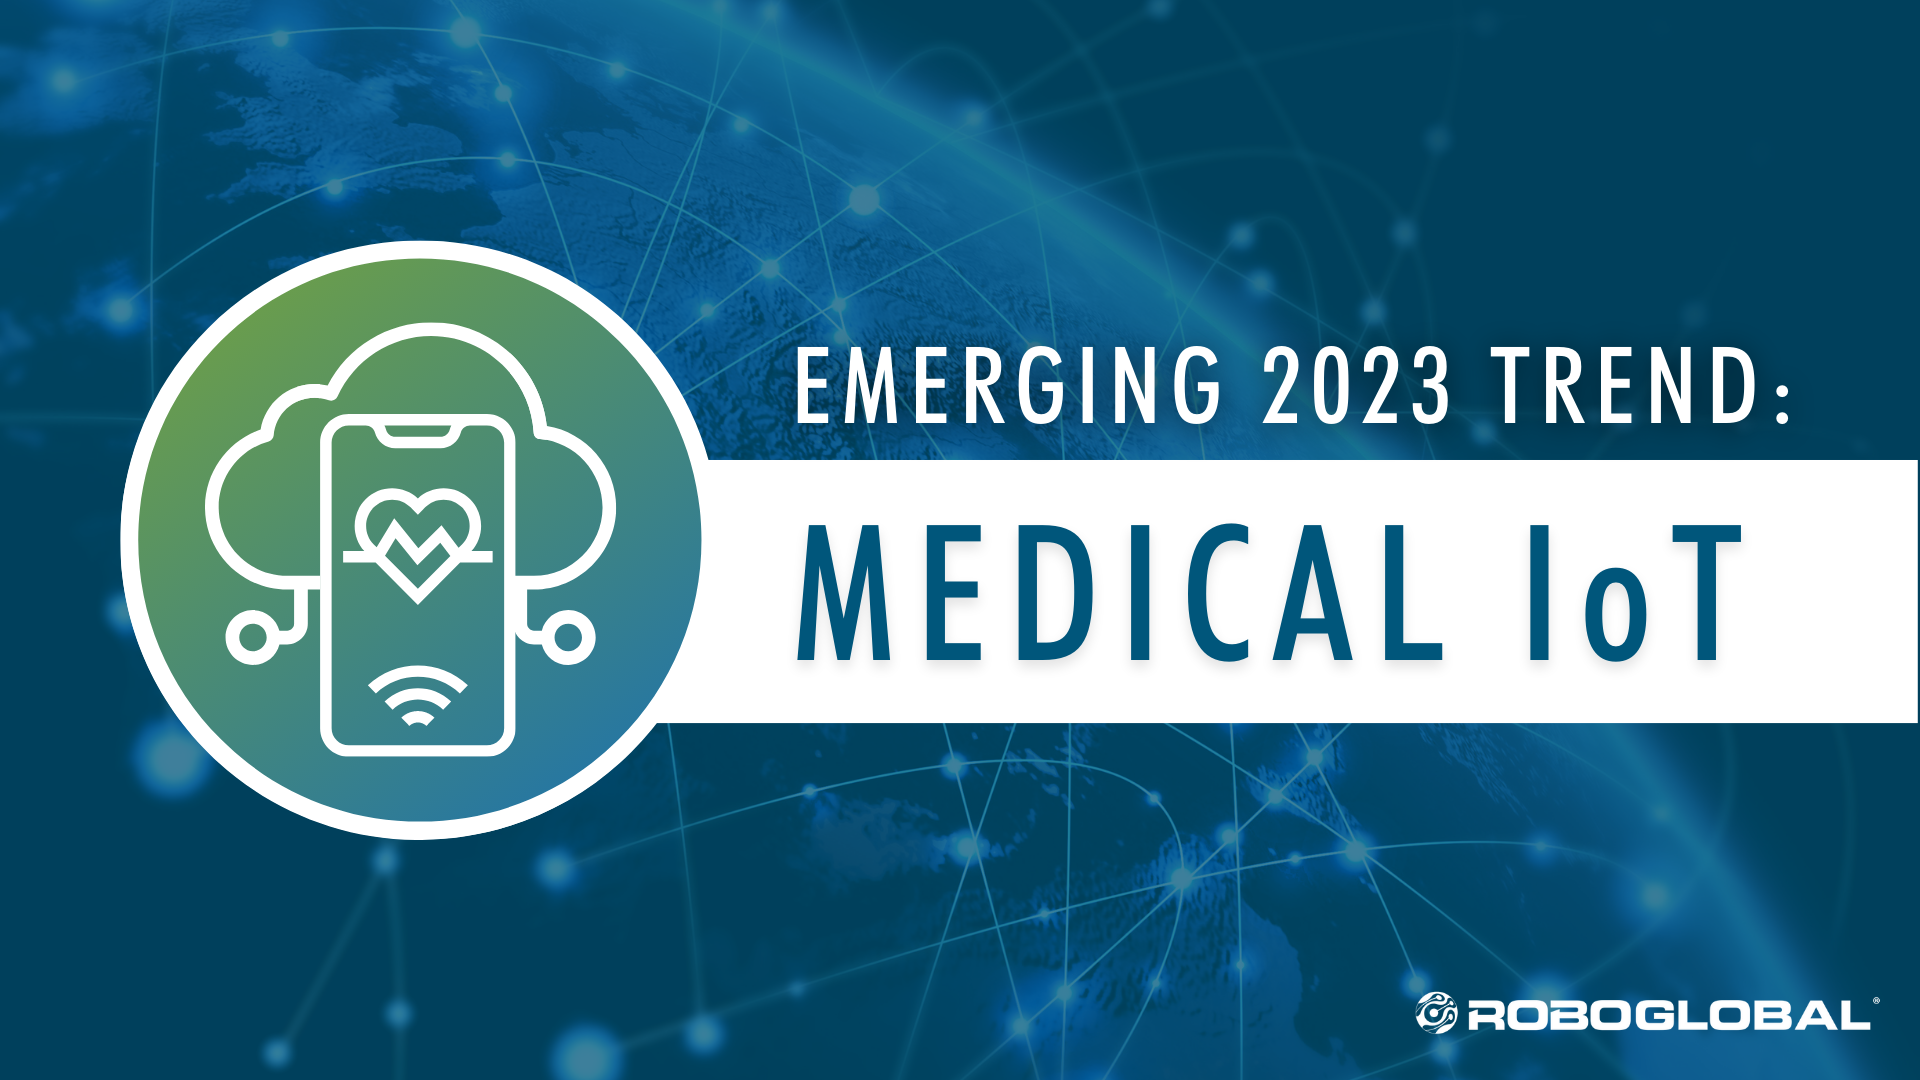 Connected Care is Coming: A Look at The Advancement of Medical IoT